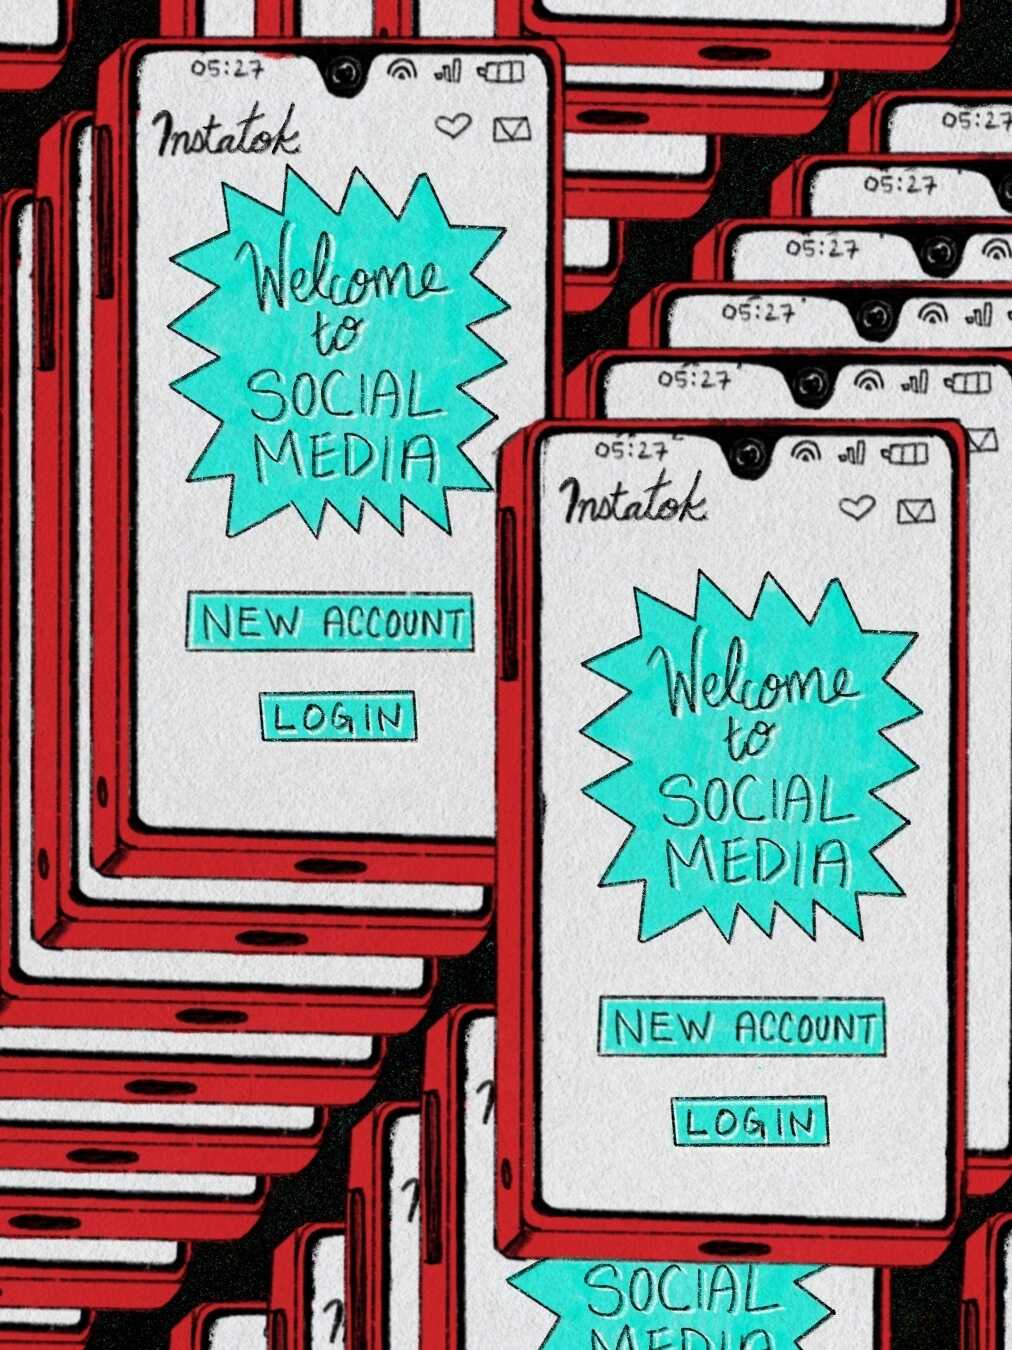 A dizzying pattern of repeating cellphones covers the page. On the screen of a phone, text reads: Welcome to Social Media. Open a New Account.